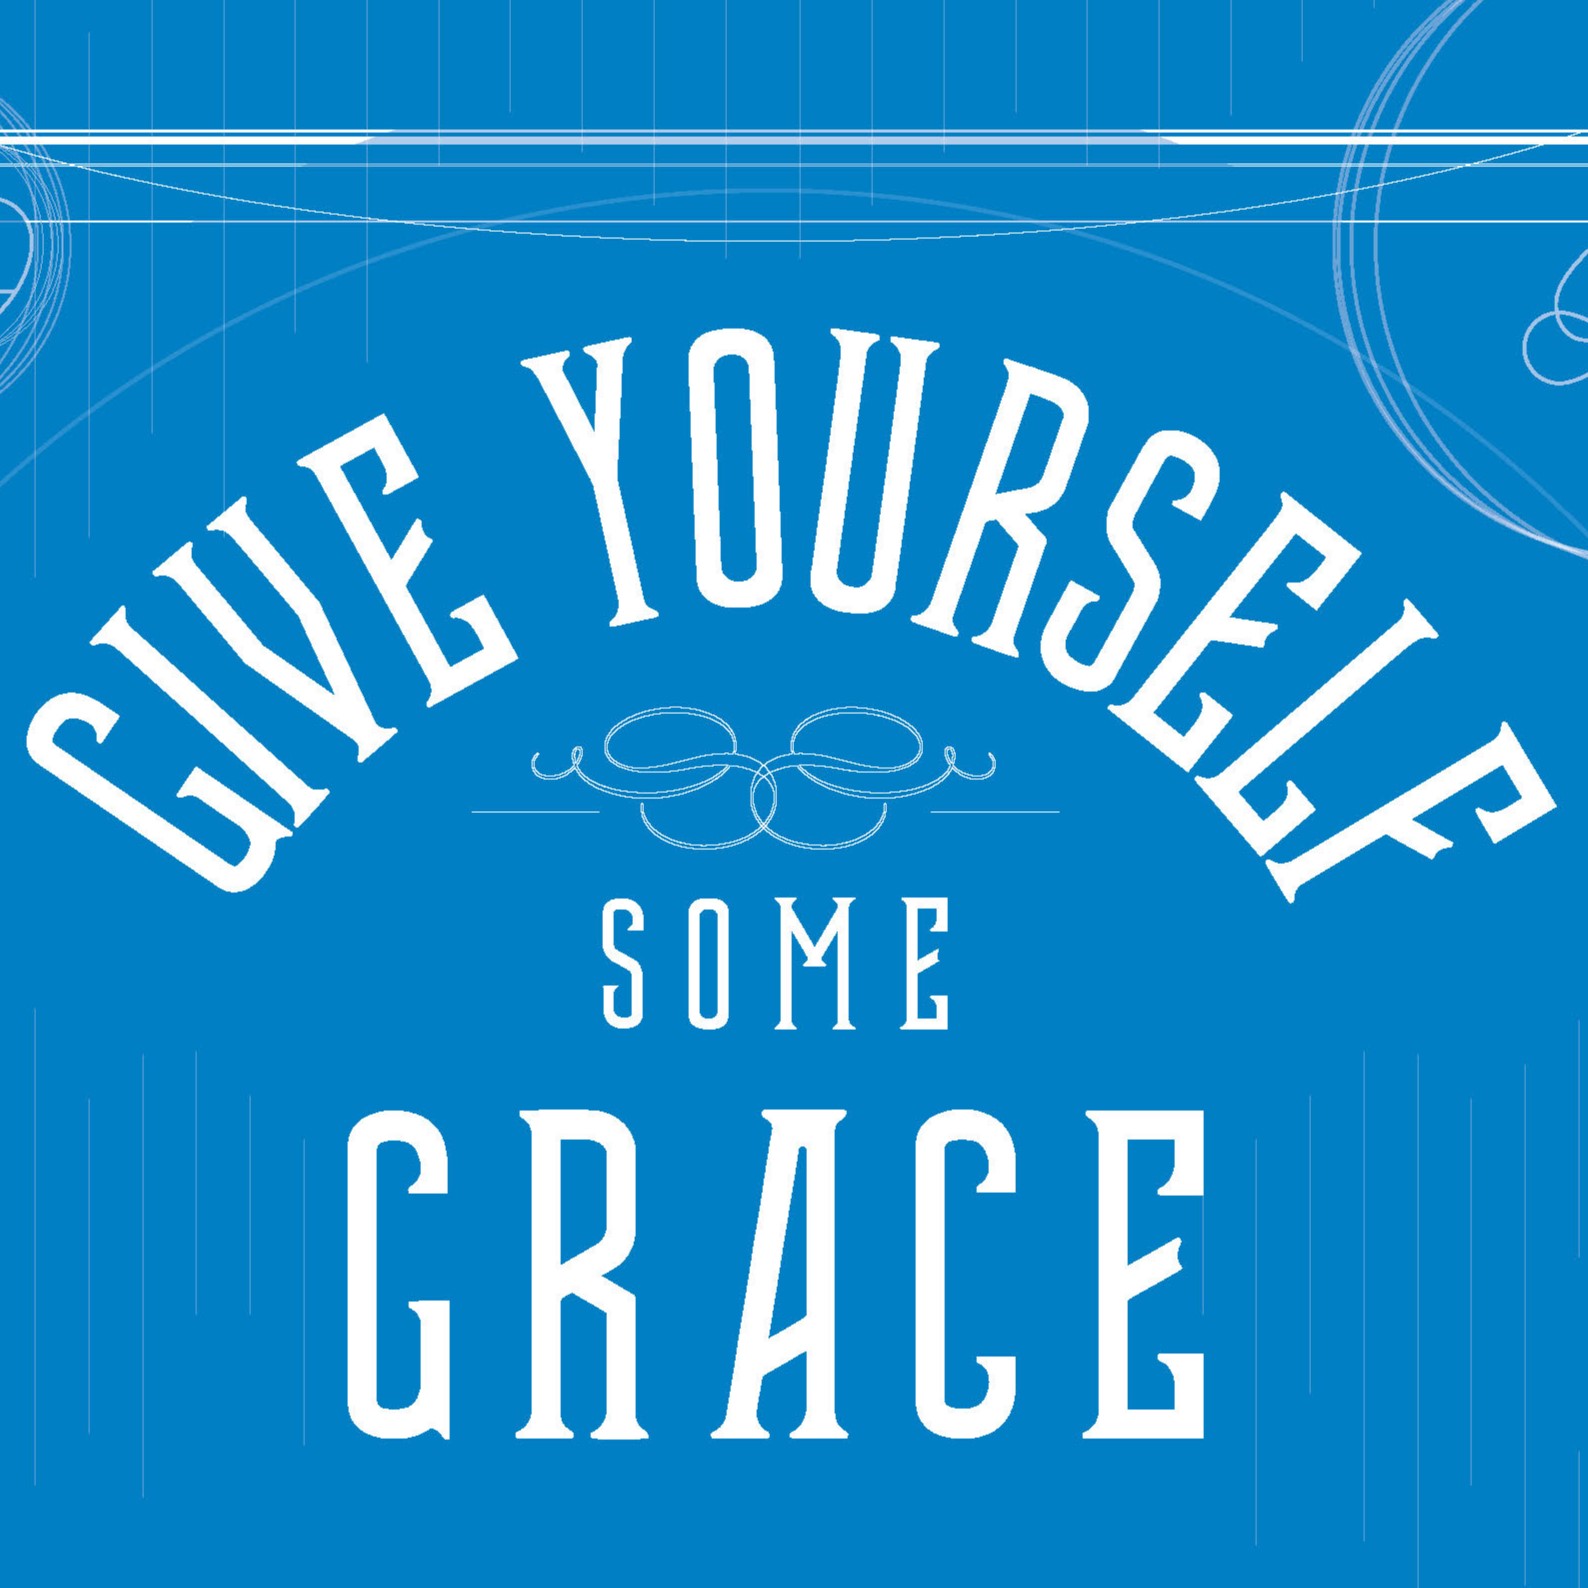 Give Yourself Some Grace